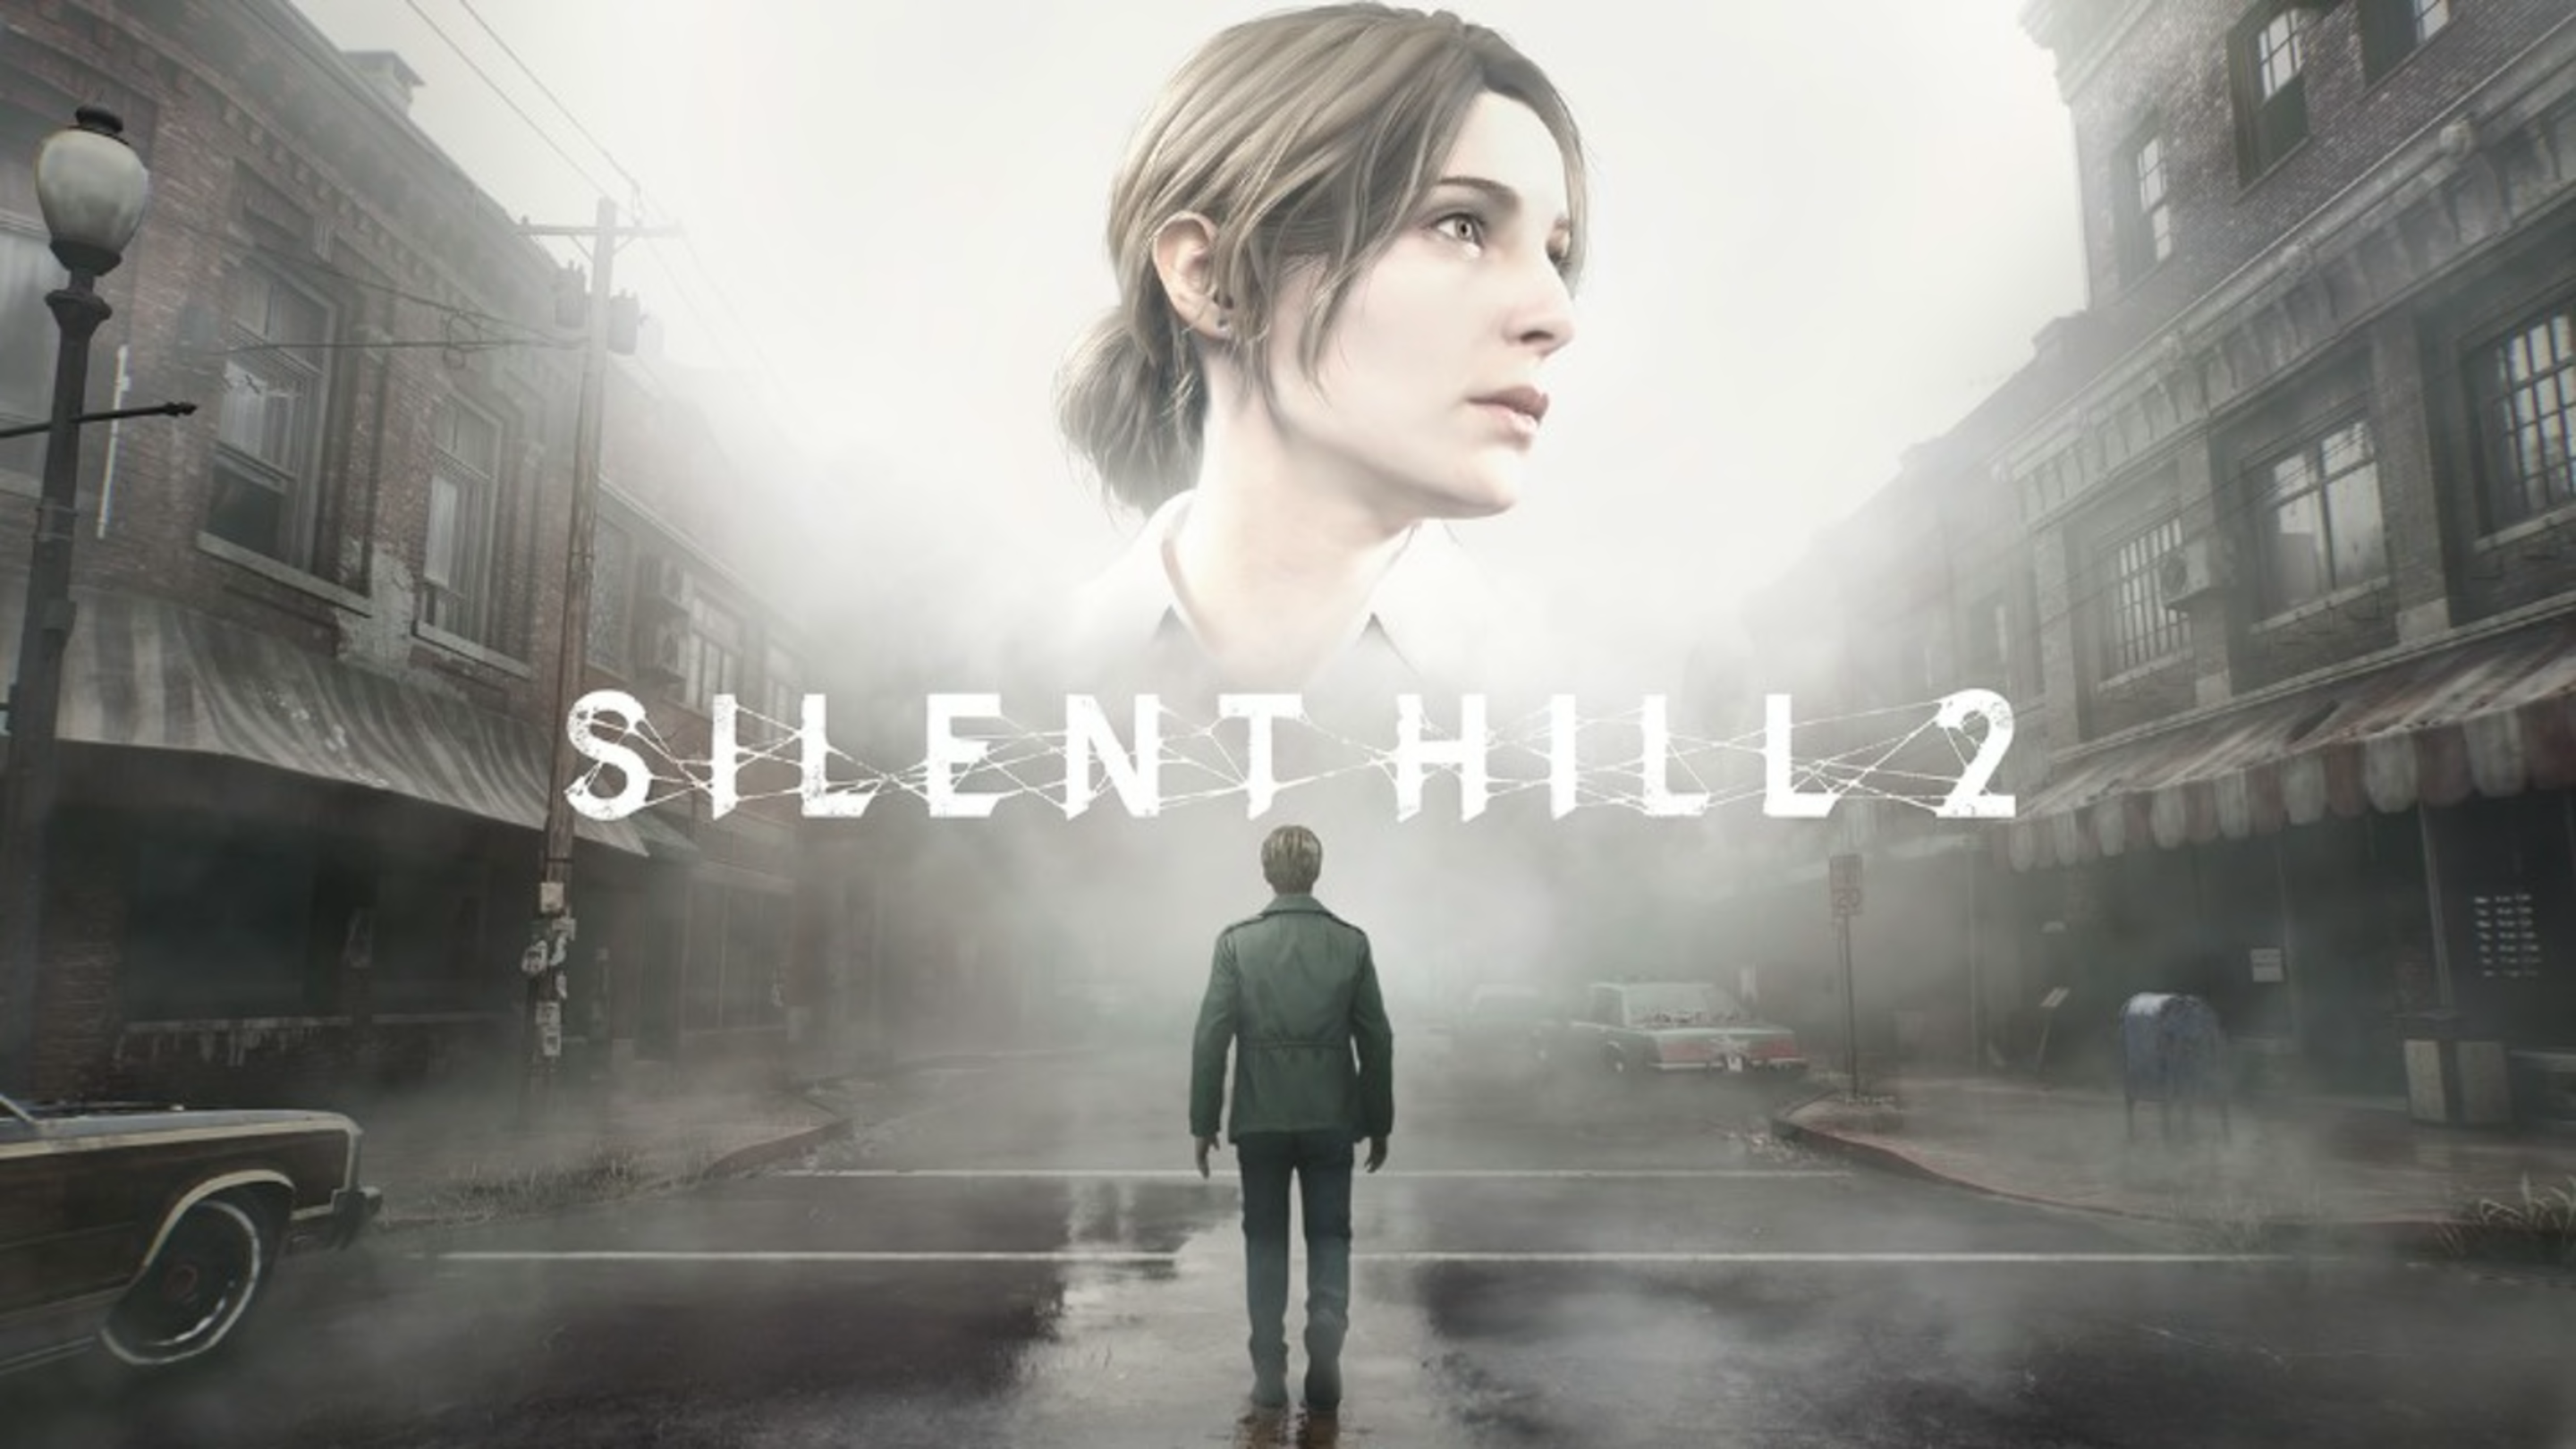 Bloober Team CEO Won't Comment On Silent Hill Rumours, But it 'Will Still  Be a Bloober Team Title' - Gameranx